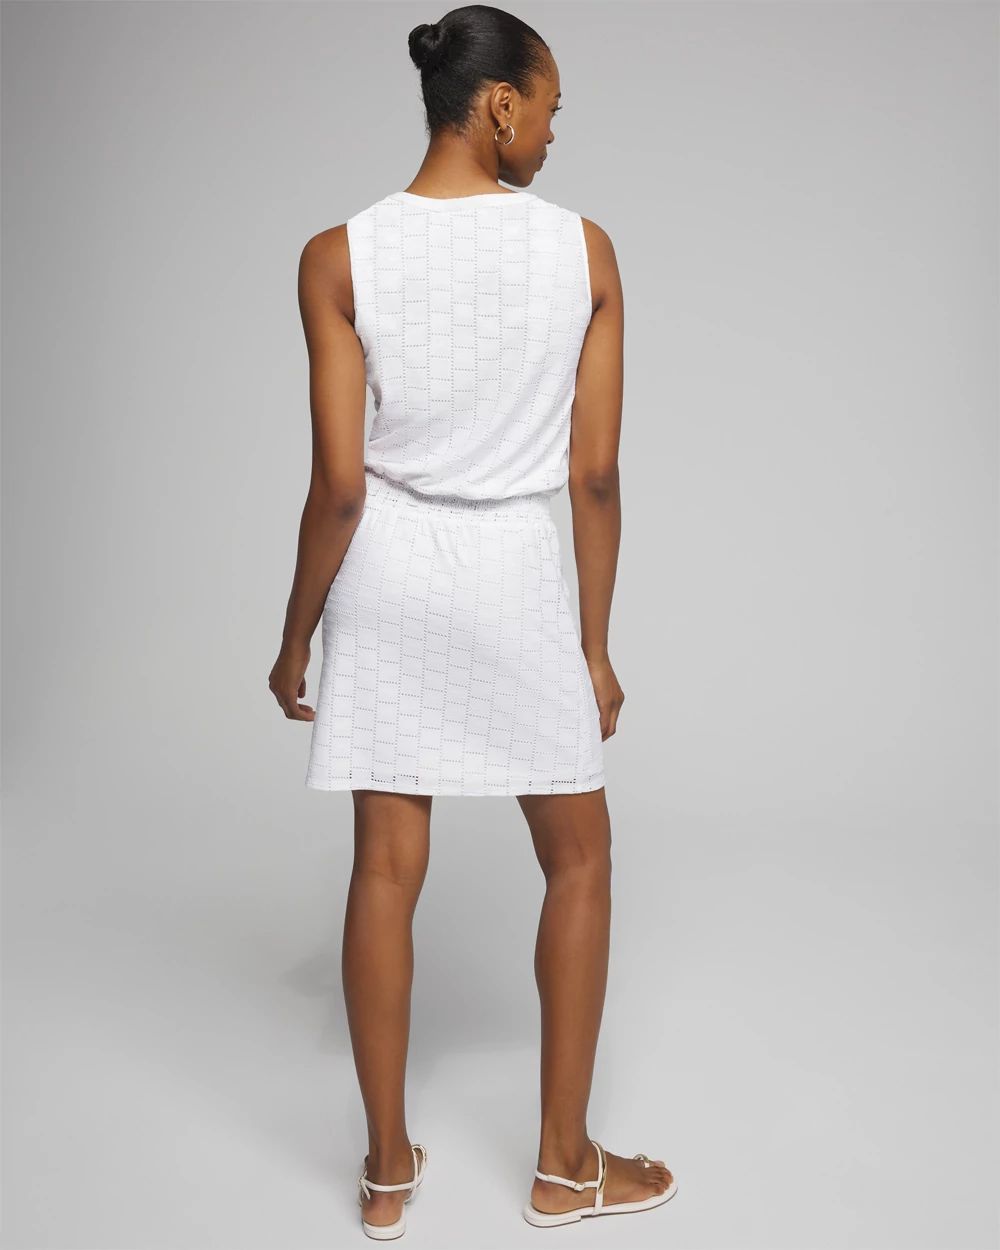 Outlet WHBM Eyelet Smocked Waist Dress click to view larger image.